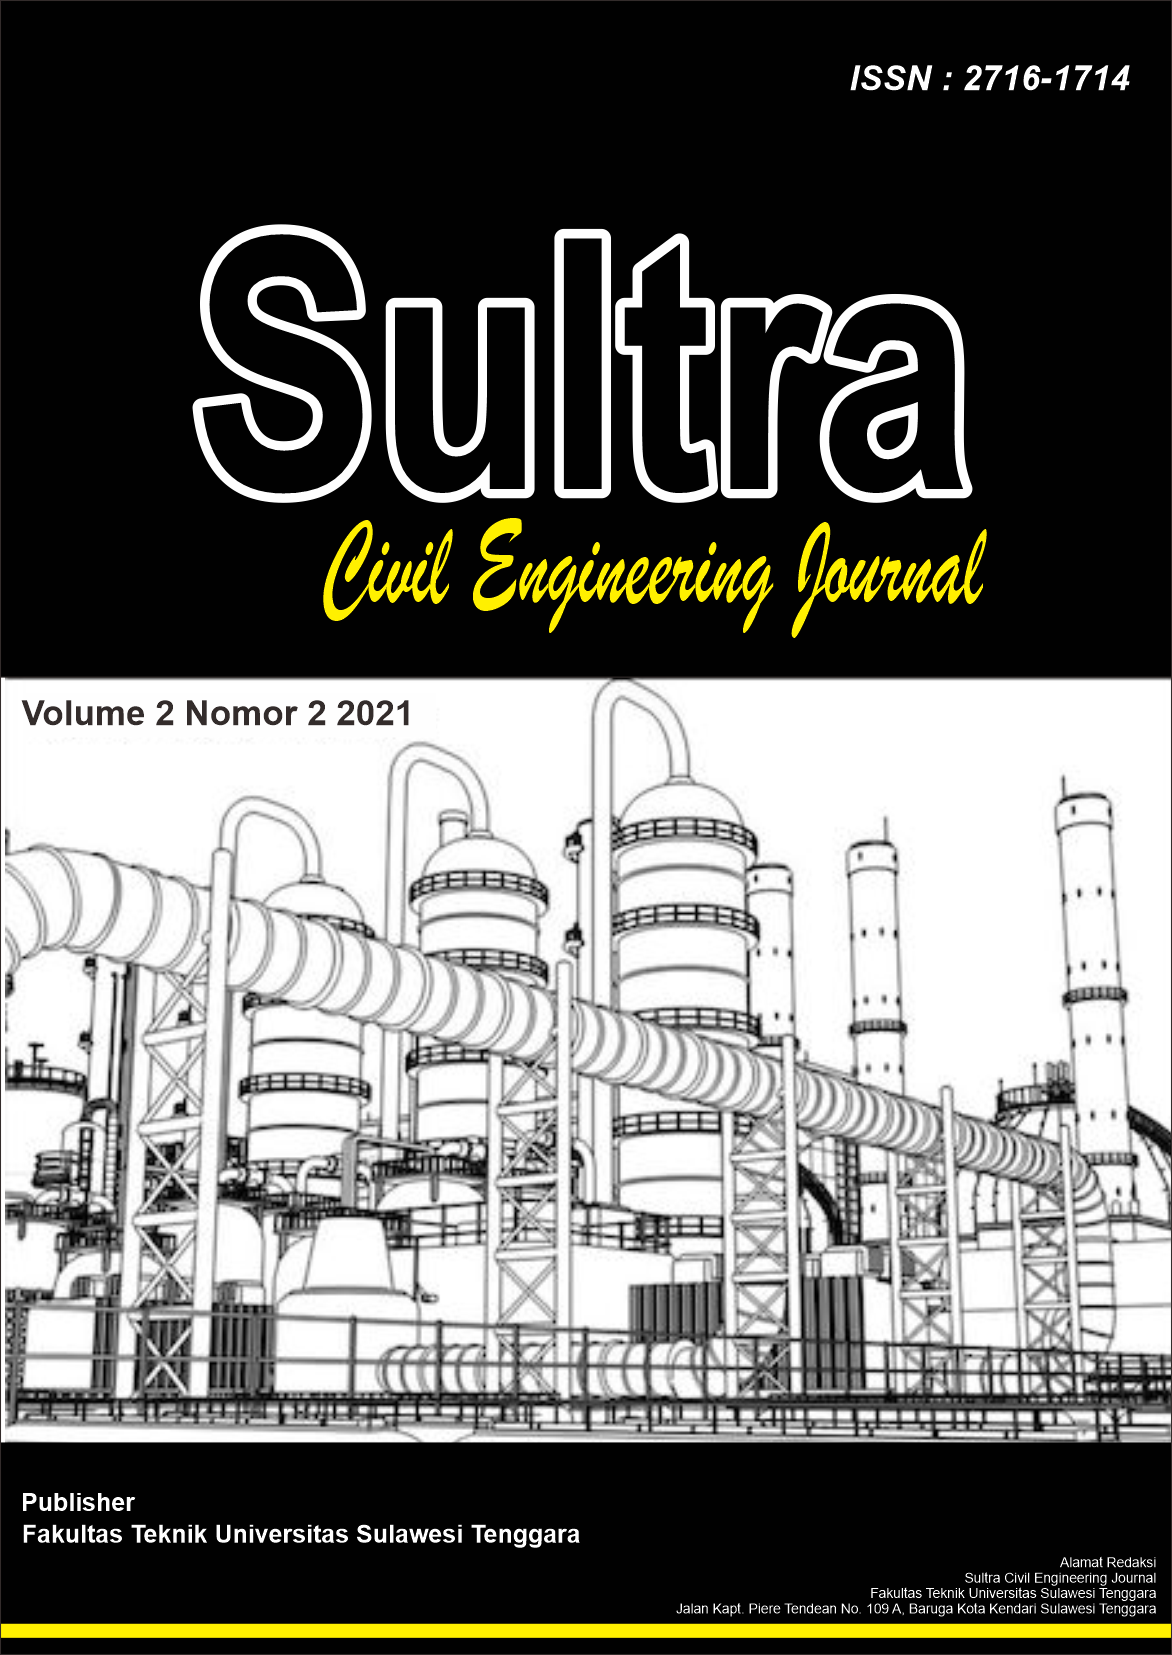 Sultra Civil Engineering Journal